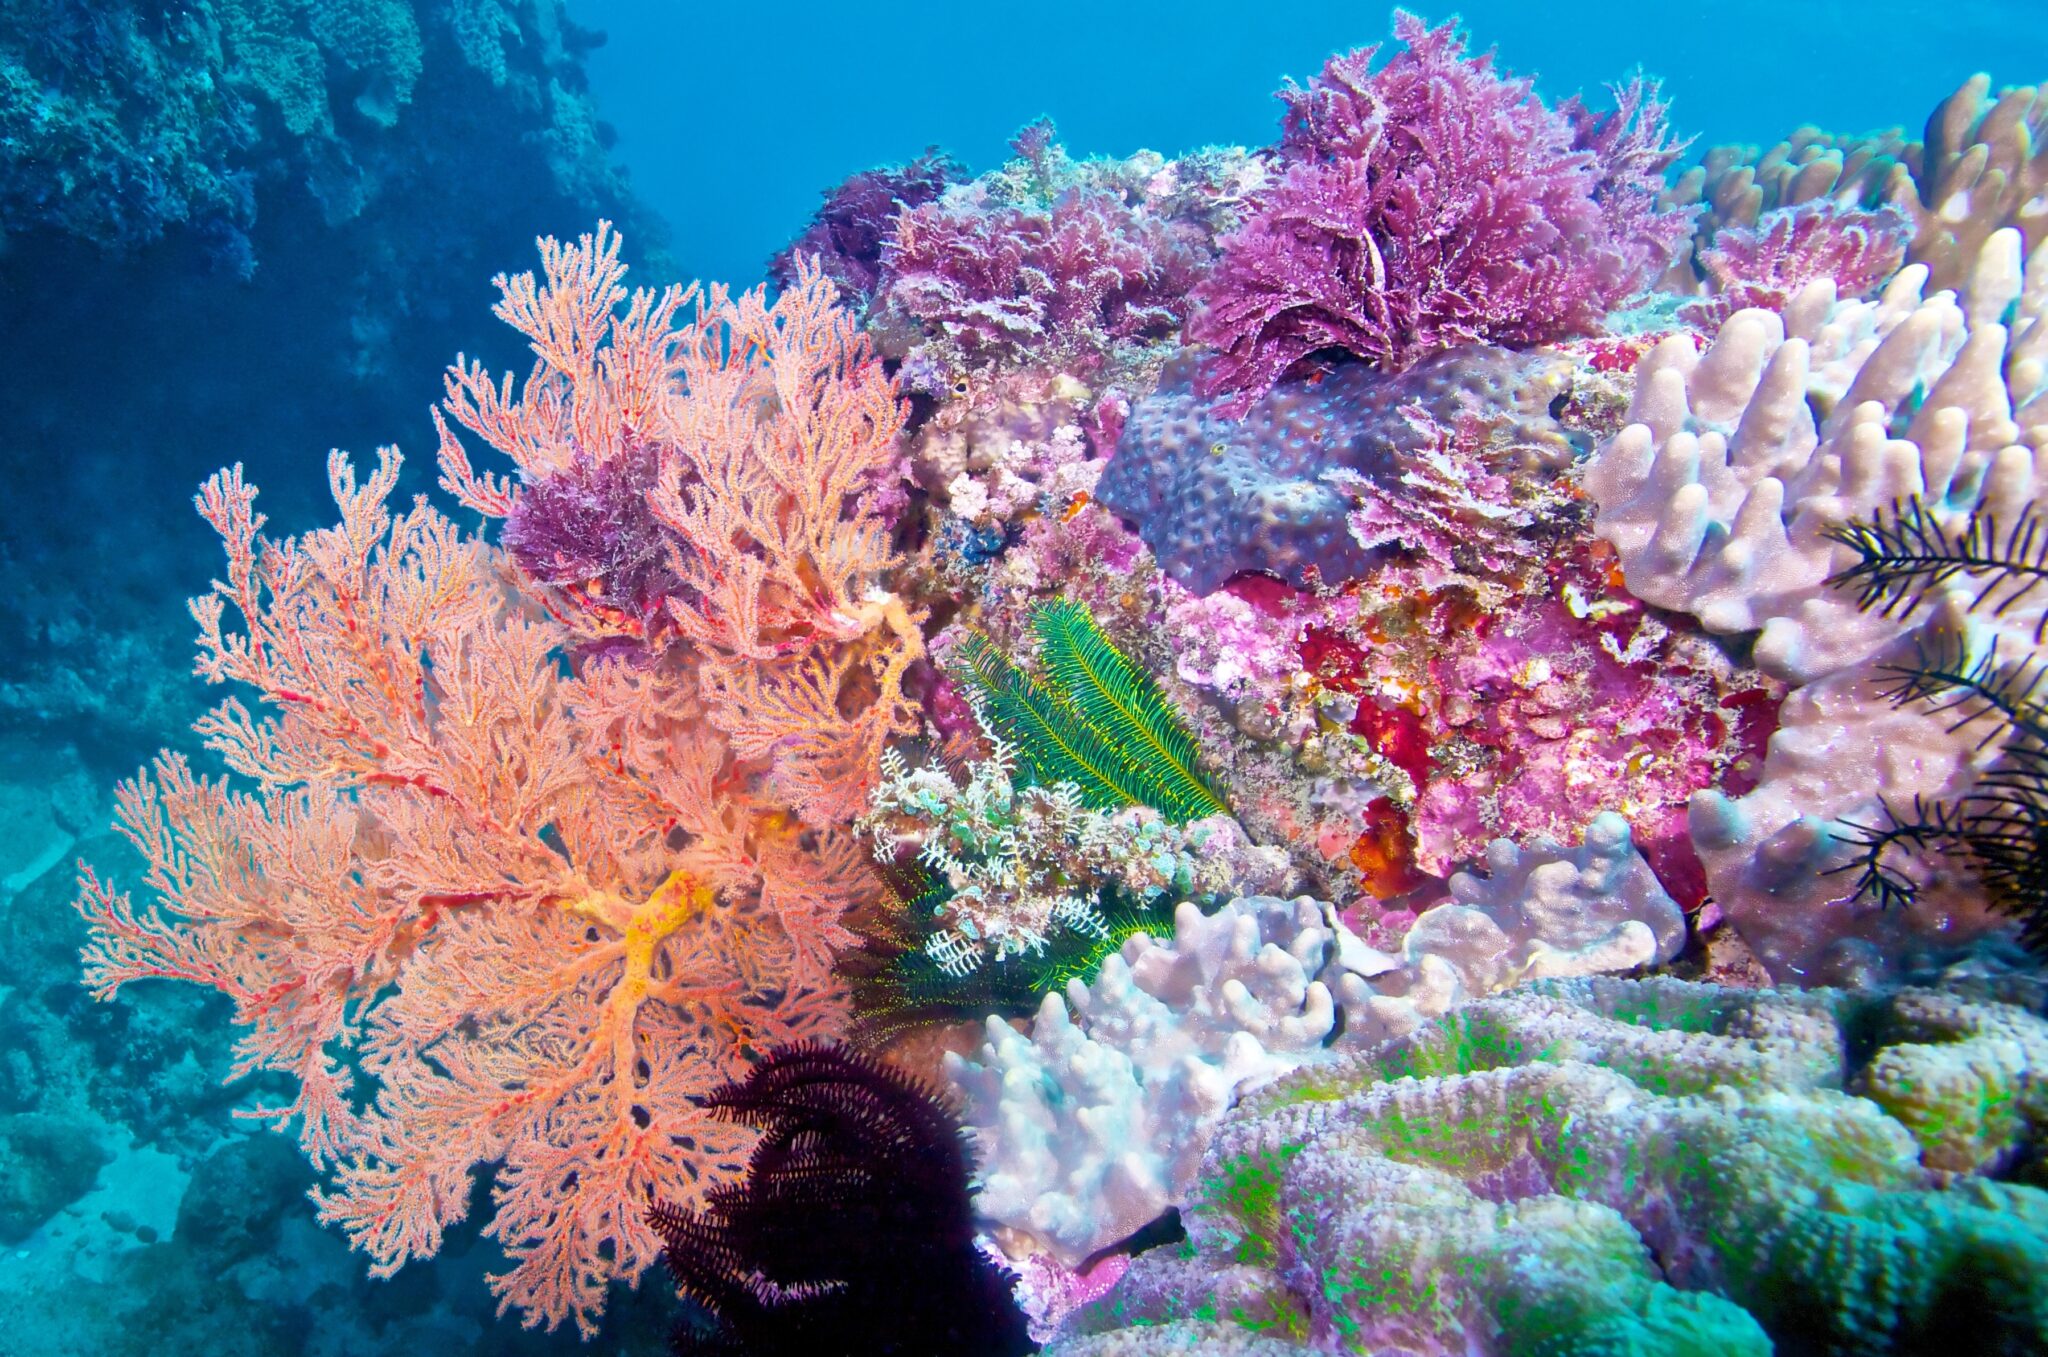 A vibrant coral reef in Taiwan